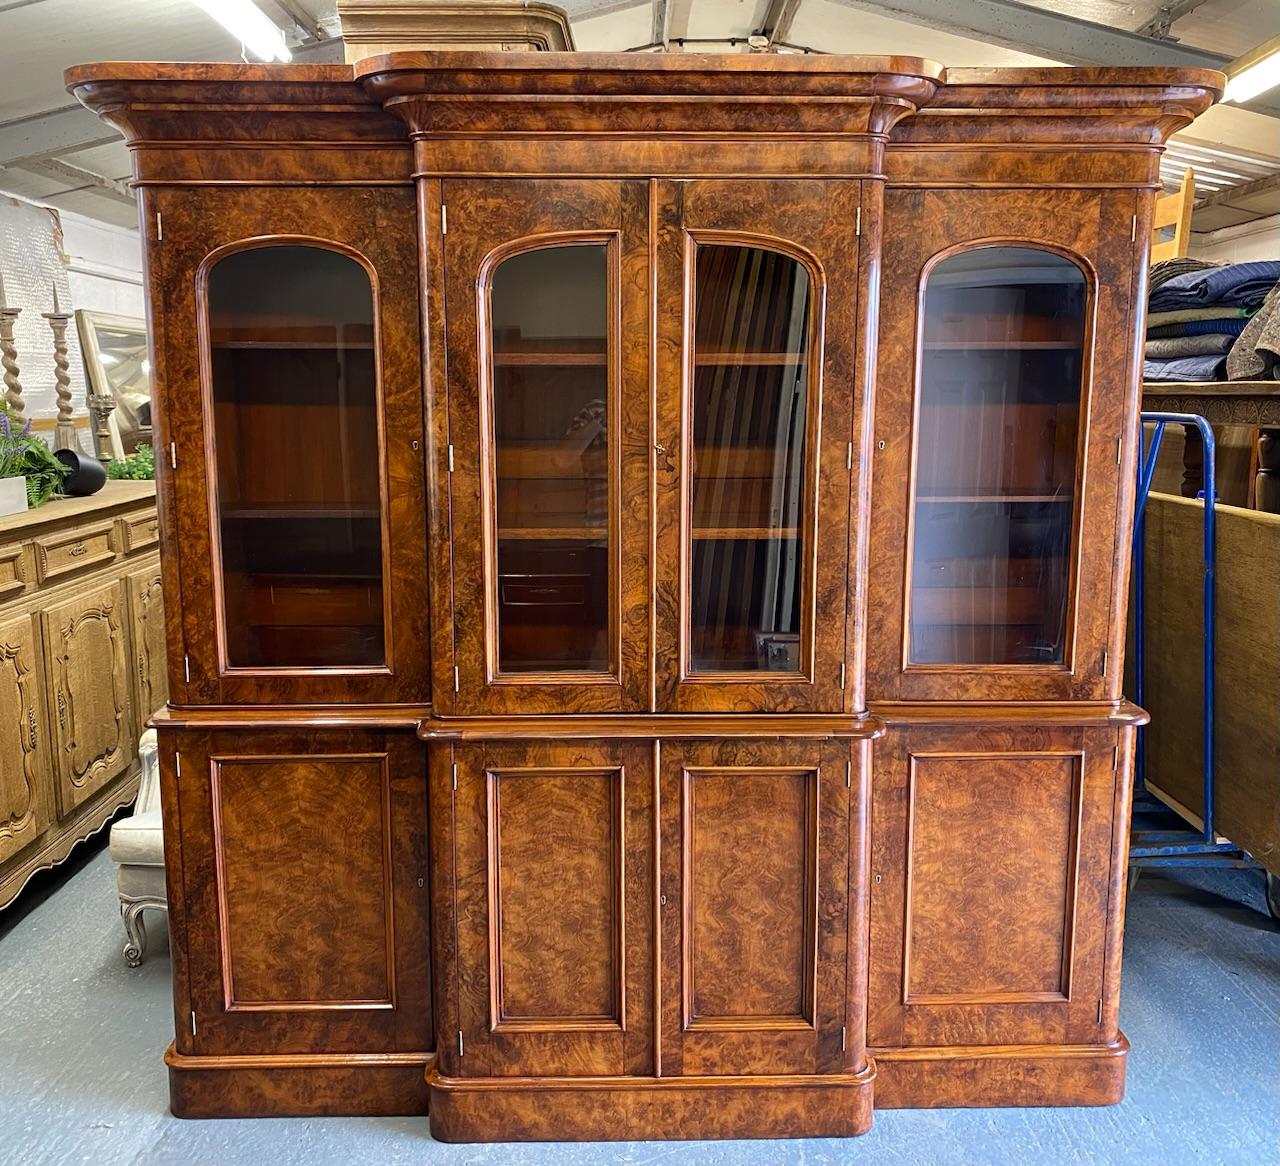 A lovely Burr Walnut Library Bookcase, breakfront and round cornered in form and dating to the mid Victorian period. A very good quality piece and typical of the Victorian craftmanship. All the doors are lockable, key present. There are 2 shelves in